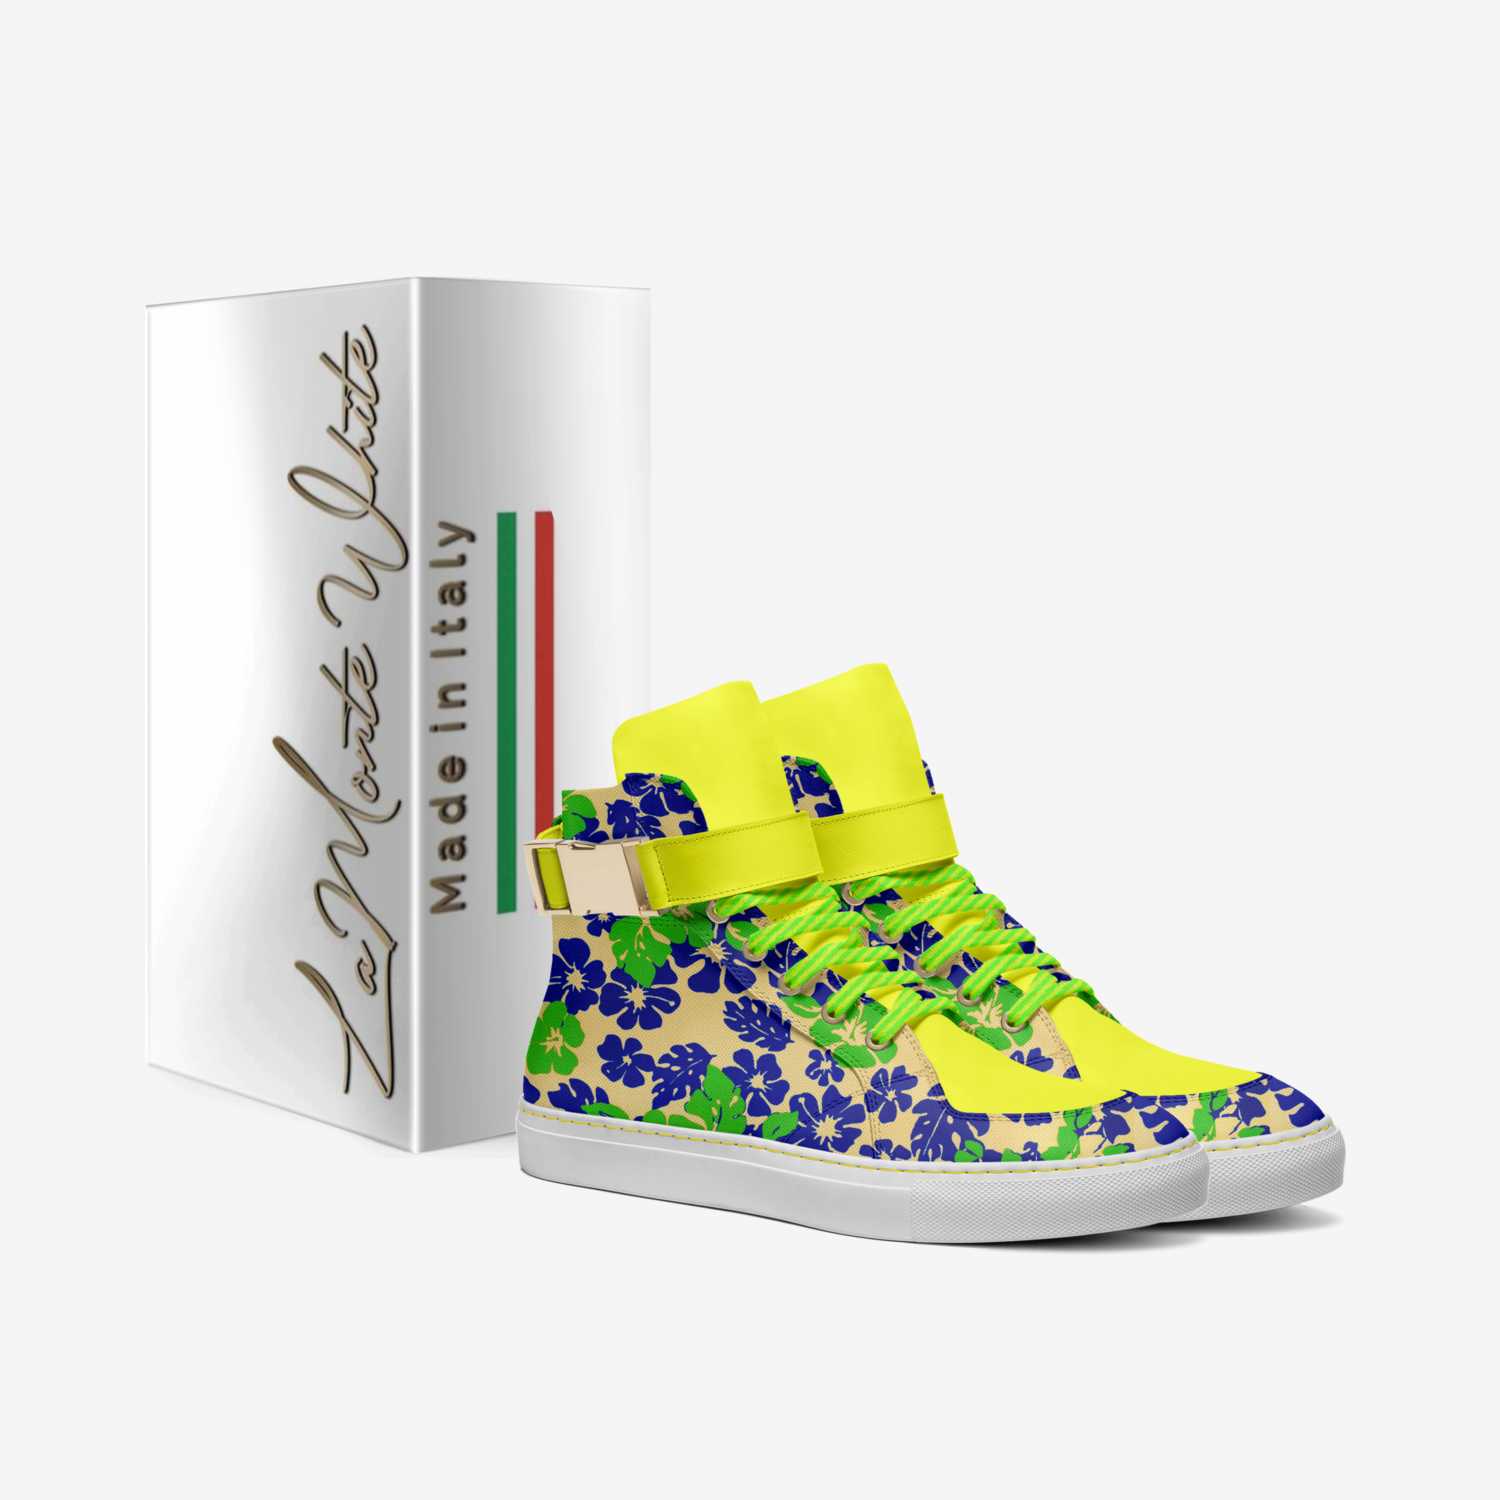 LaMonte White custom made in Italy shoes by Lamonte White | Box view